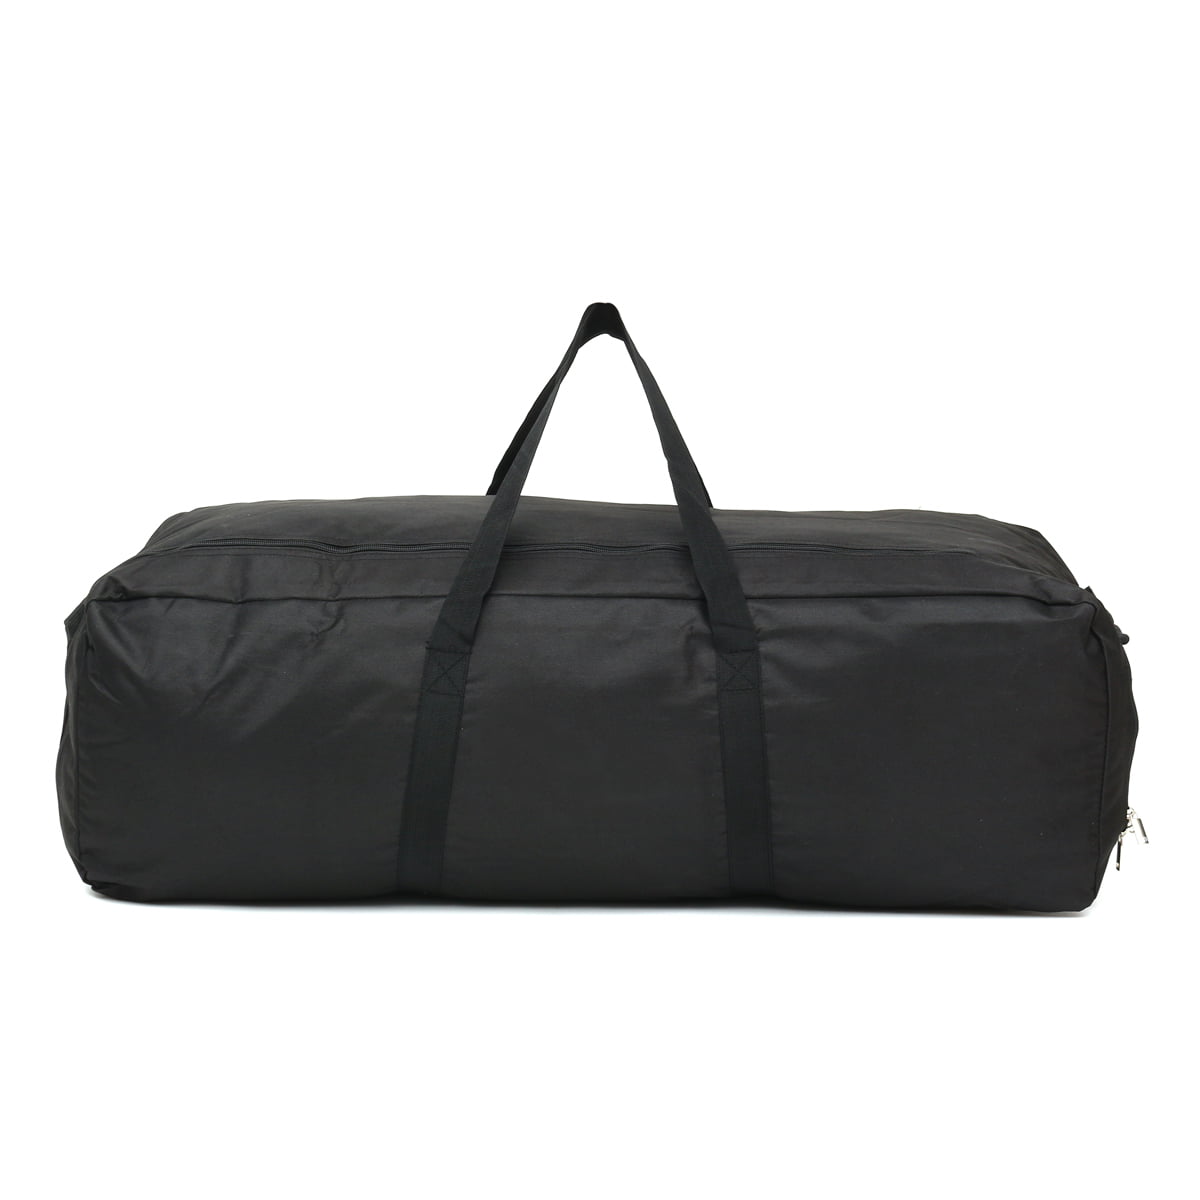 Black Vogshow 80L Large Packable Travel Duffle Bag Overnight Weekend Carry on Holdall Bag Foldable Sports Gym Bag with Shoe Compartment for Men Women